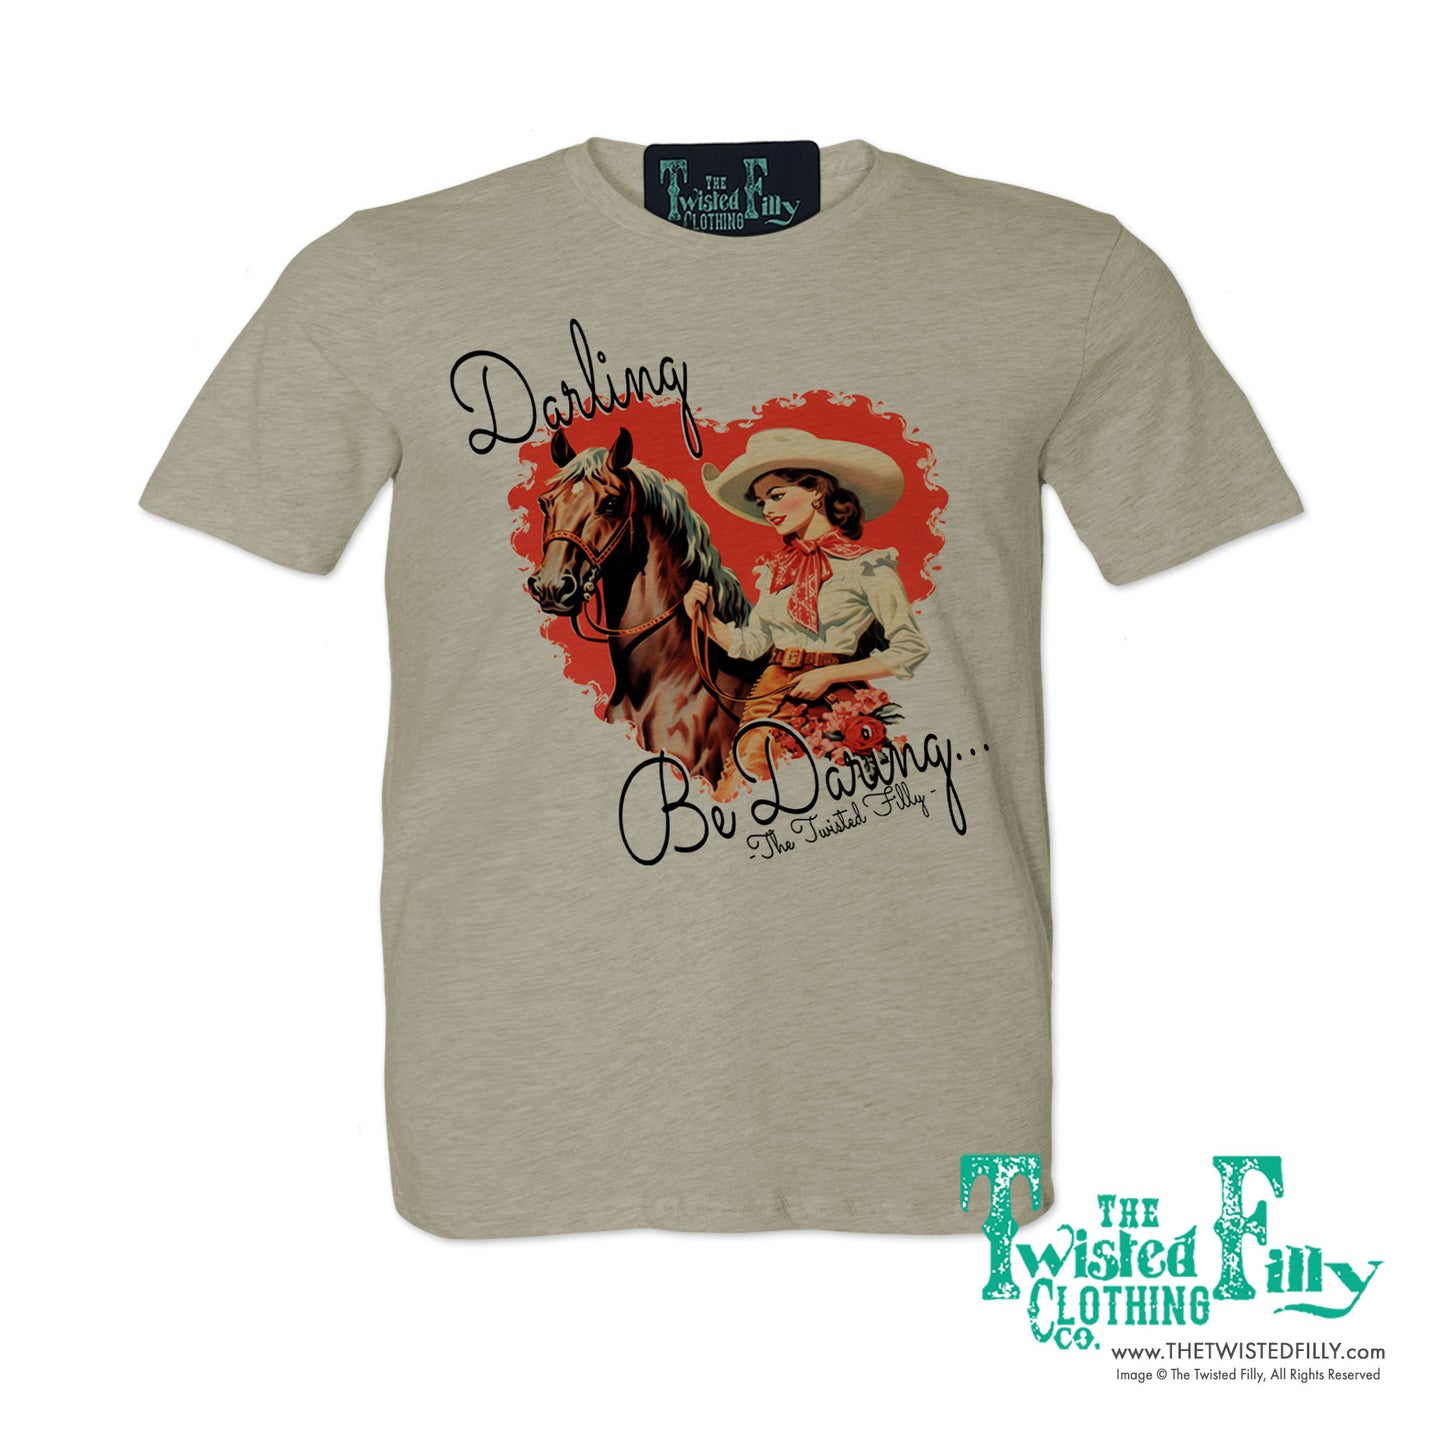 Darling Be Daring - S/S Adult Crew Neck Womens Tee - Assorted Colors